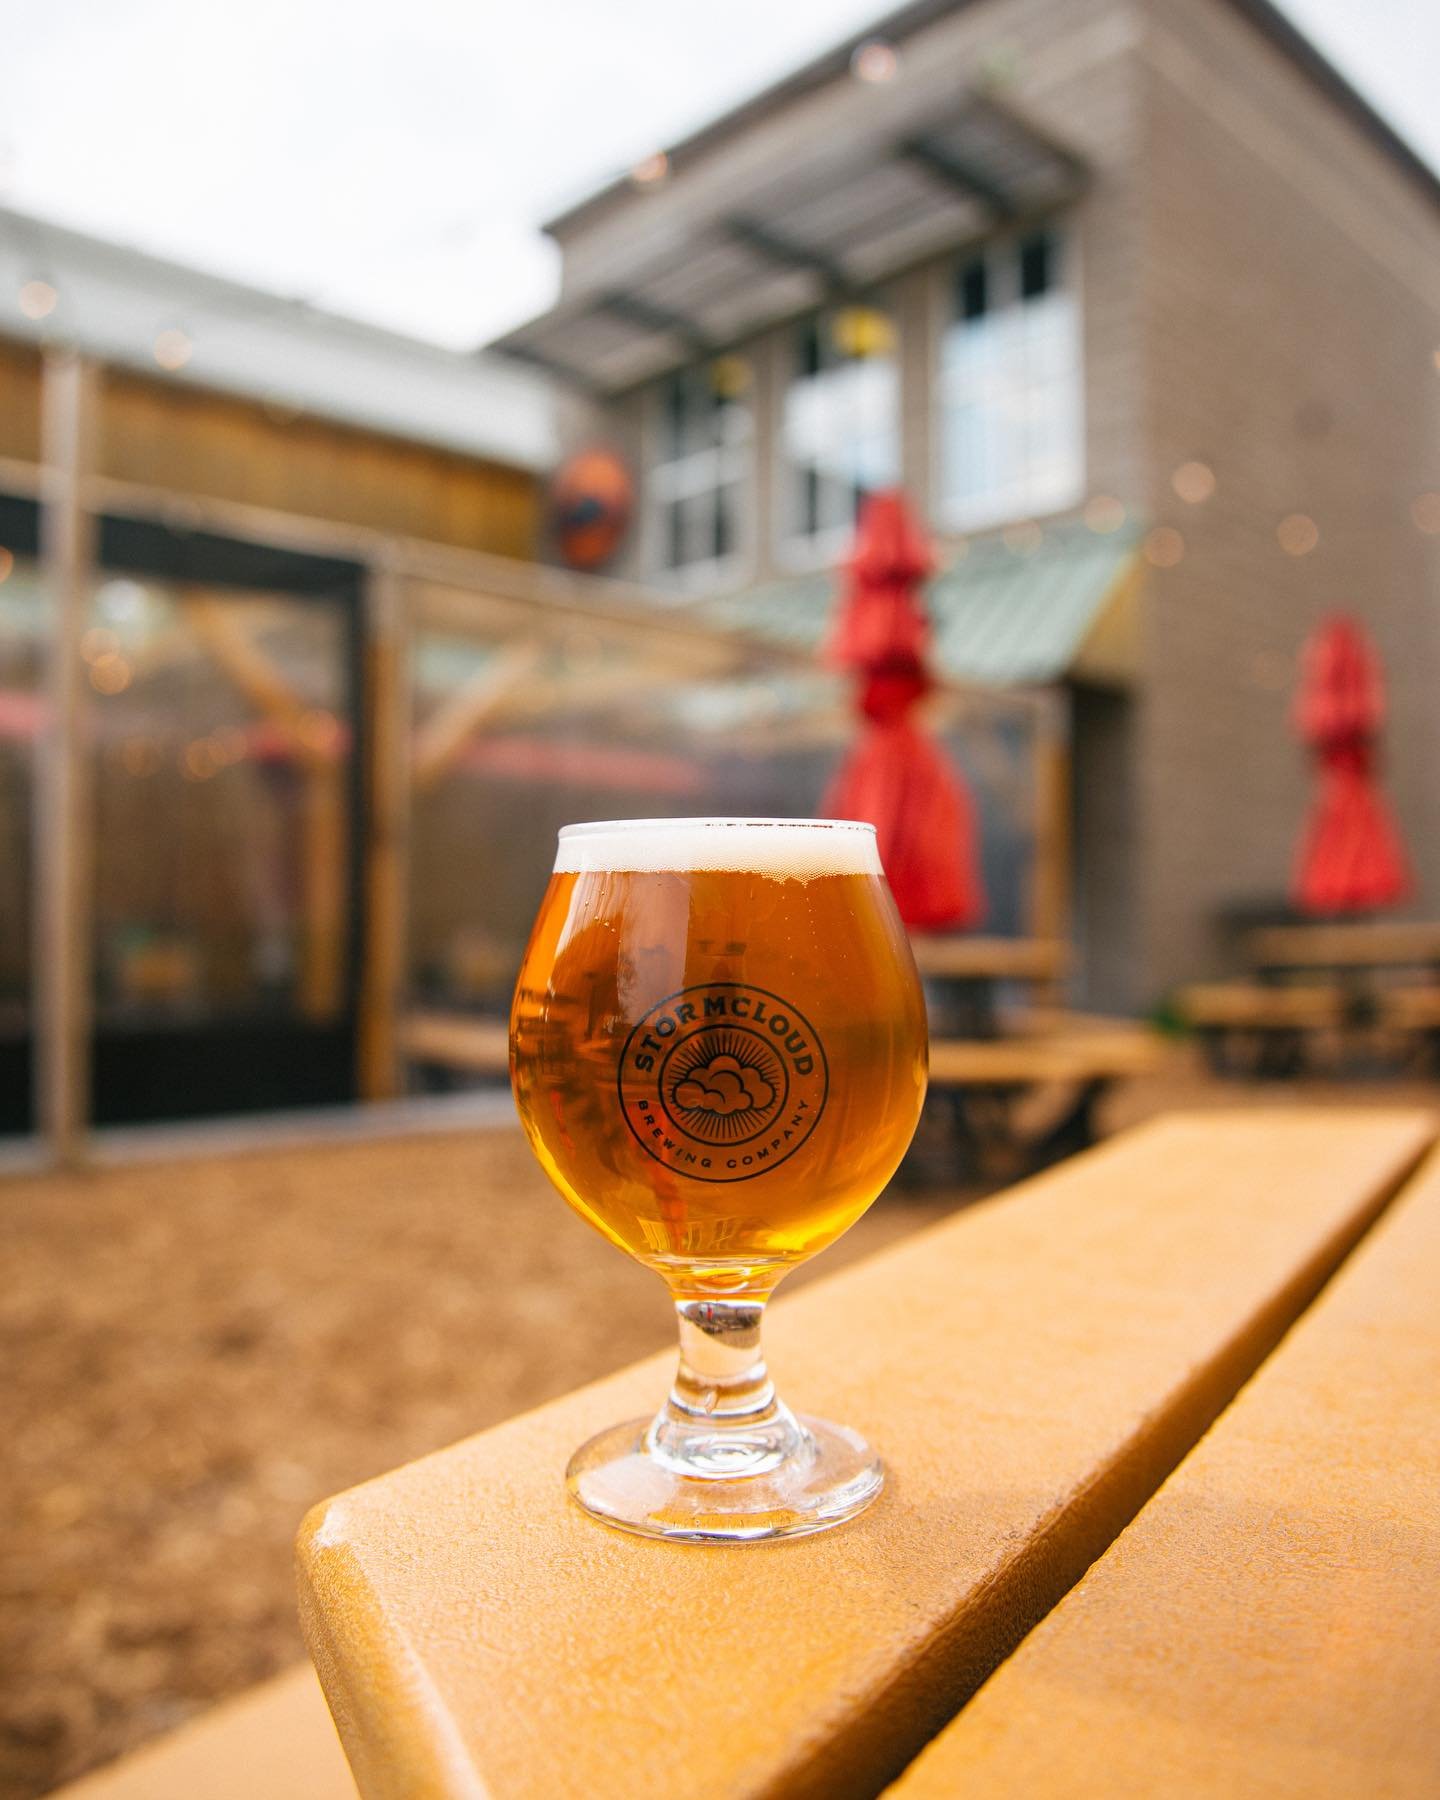 Our fourth featured beer for American Craft Beer Week is the 2023 Harvest Tripel!

At 7.2% ABV, our 2023 Harvest Tripel is a Belgian Tripel featuring fresh harvest COMET hops from Hop Alliance in Omena, MI.

$5 / 12oz TODAY ONLY!

Suggested food pair